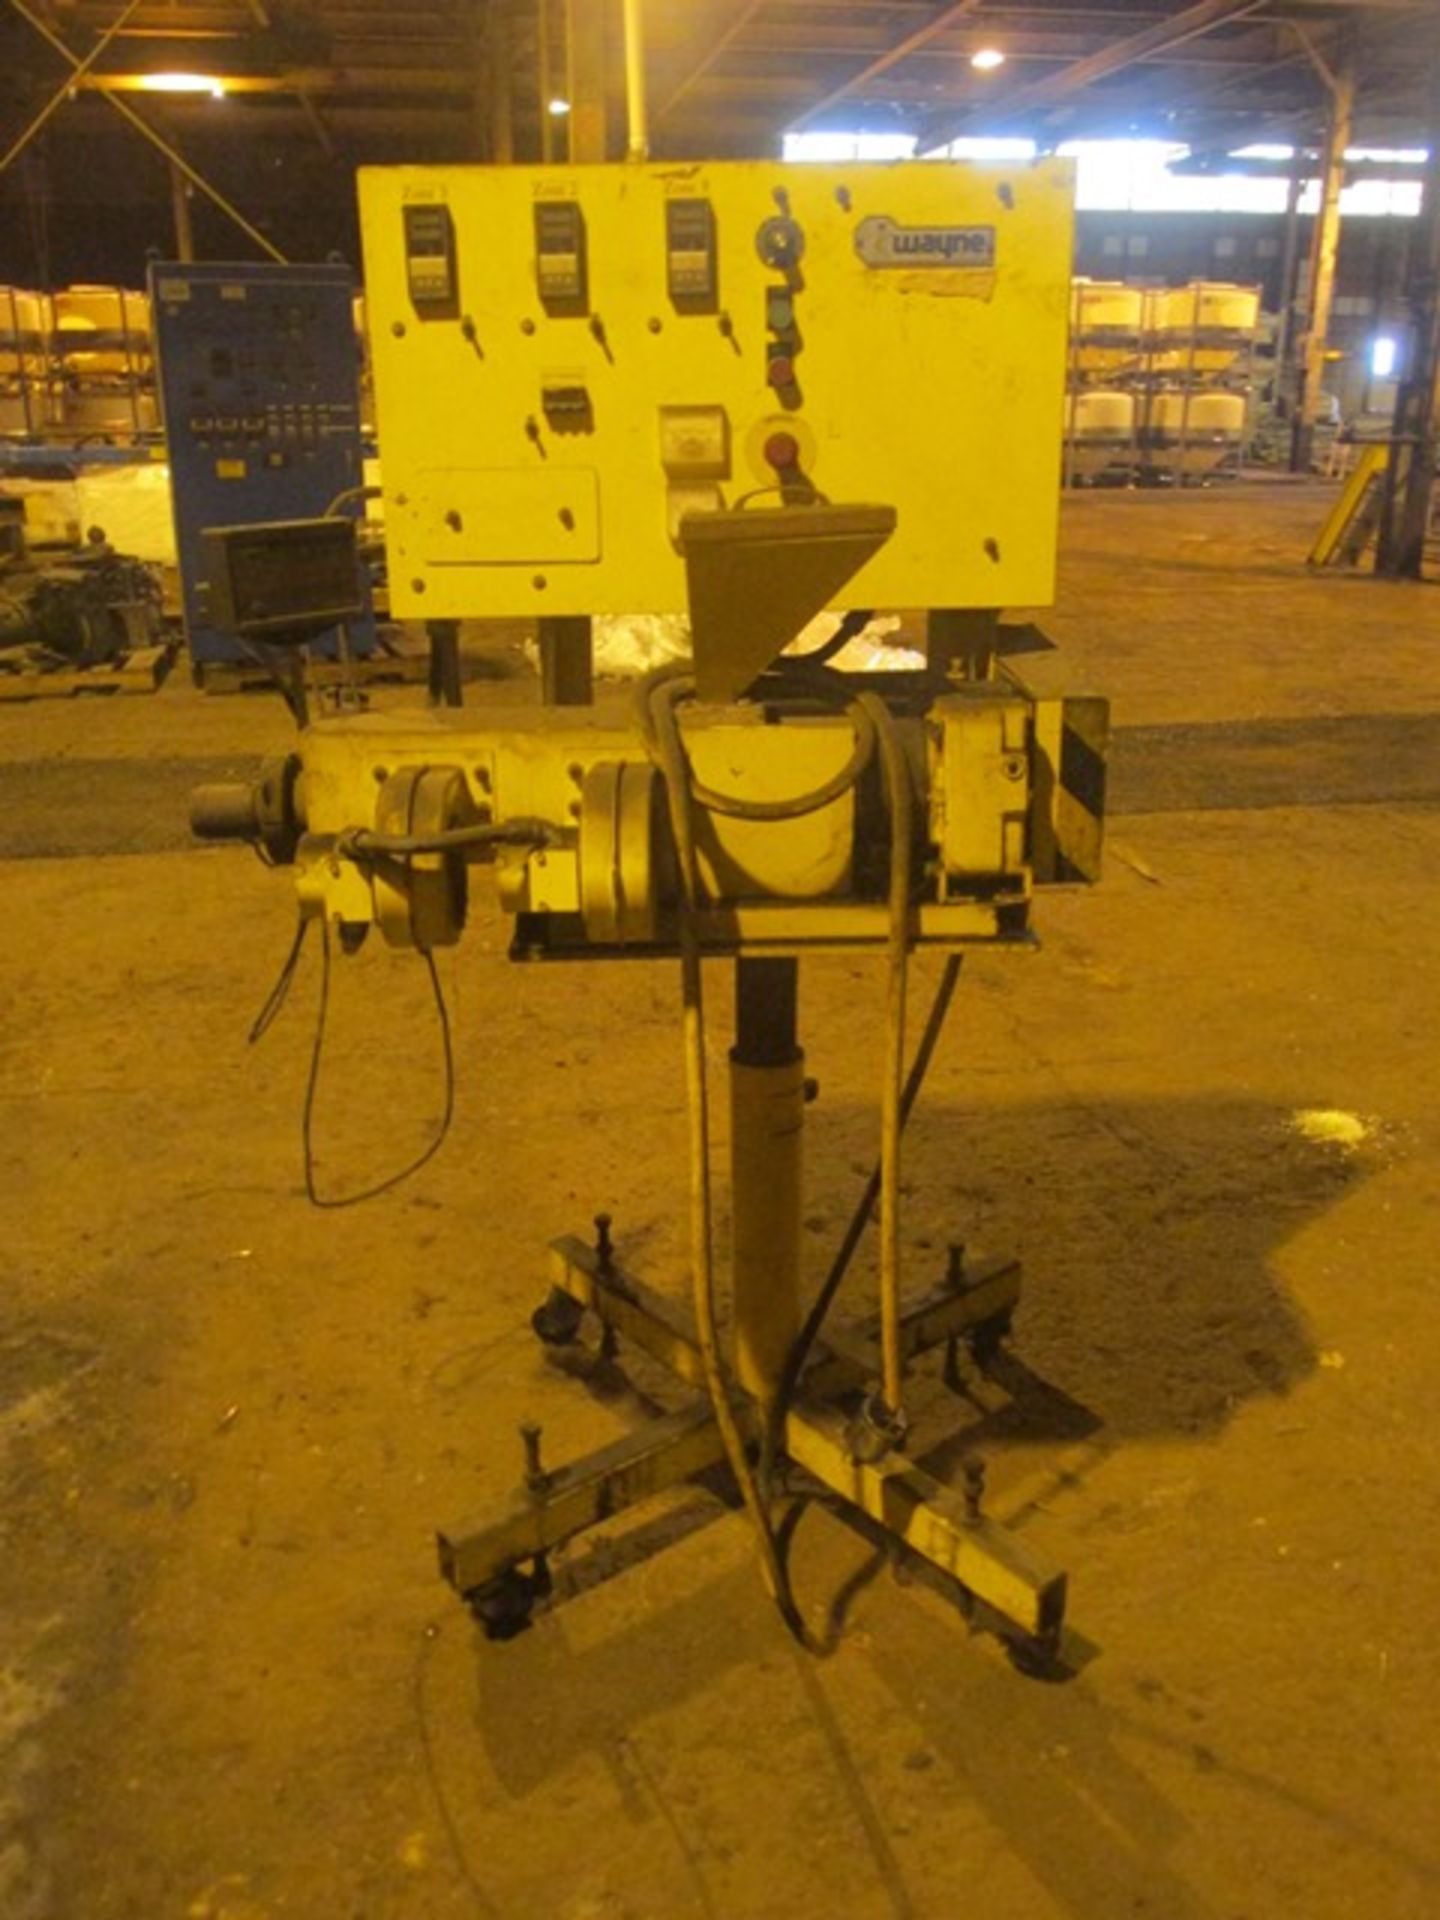 .75" Wayne extruder, 24:1 l/d, electrically heated, air cooled barrel, jacketed feed section